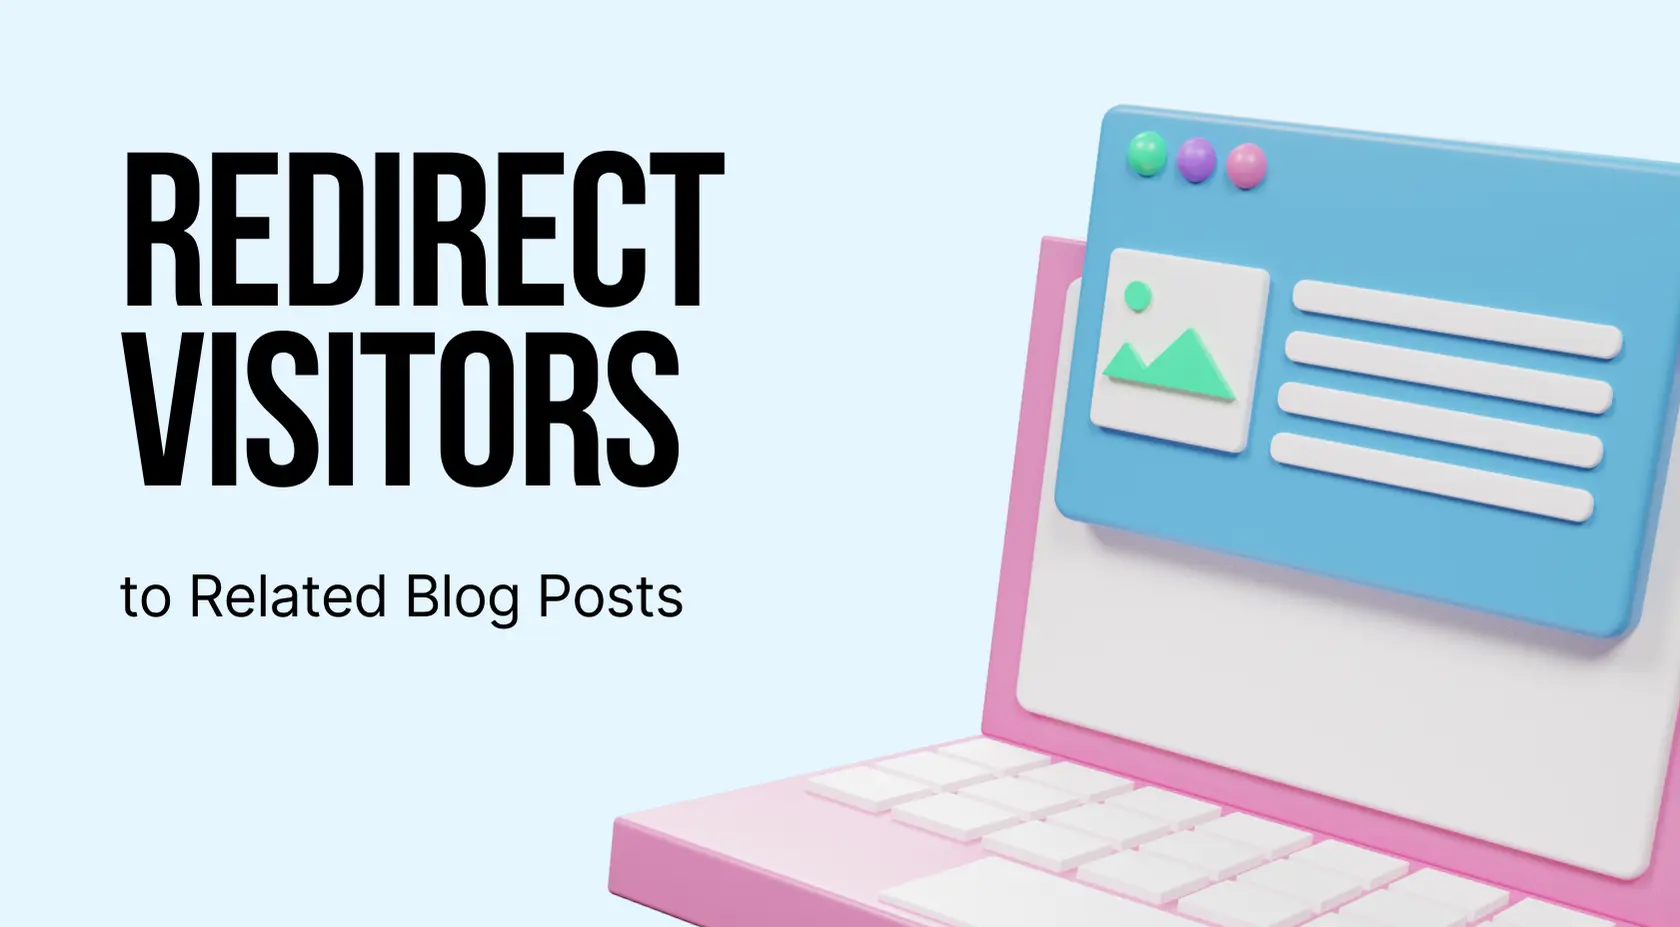 Redirect Visitors to Related Blog Posts with a Popup to Spark Interaction